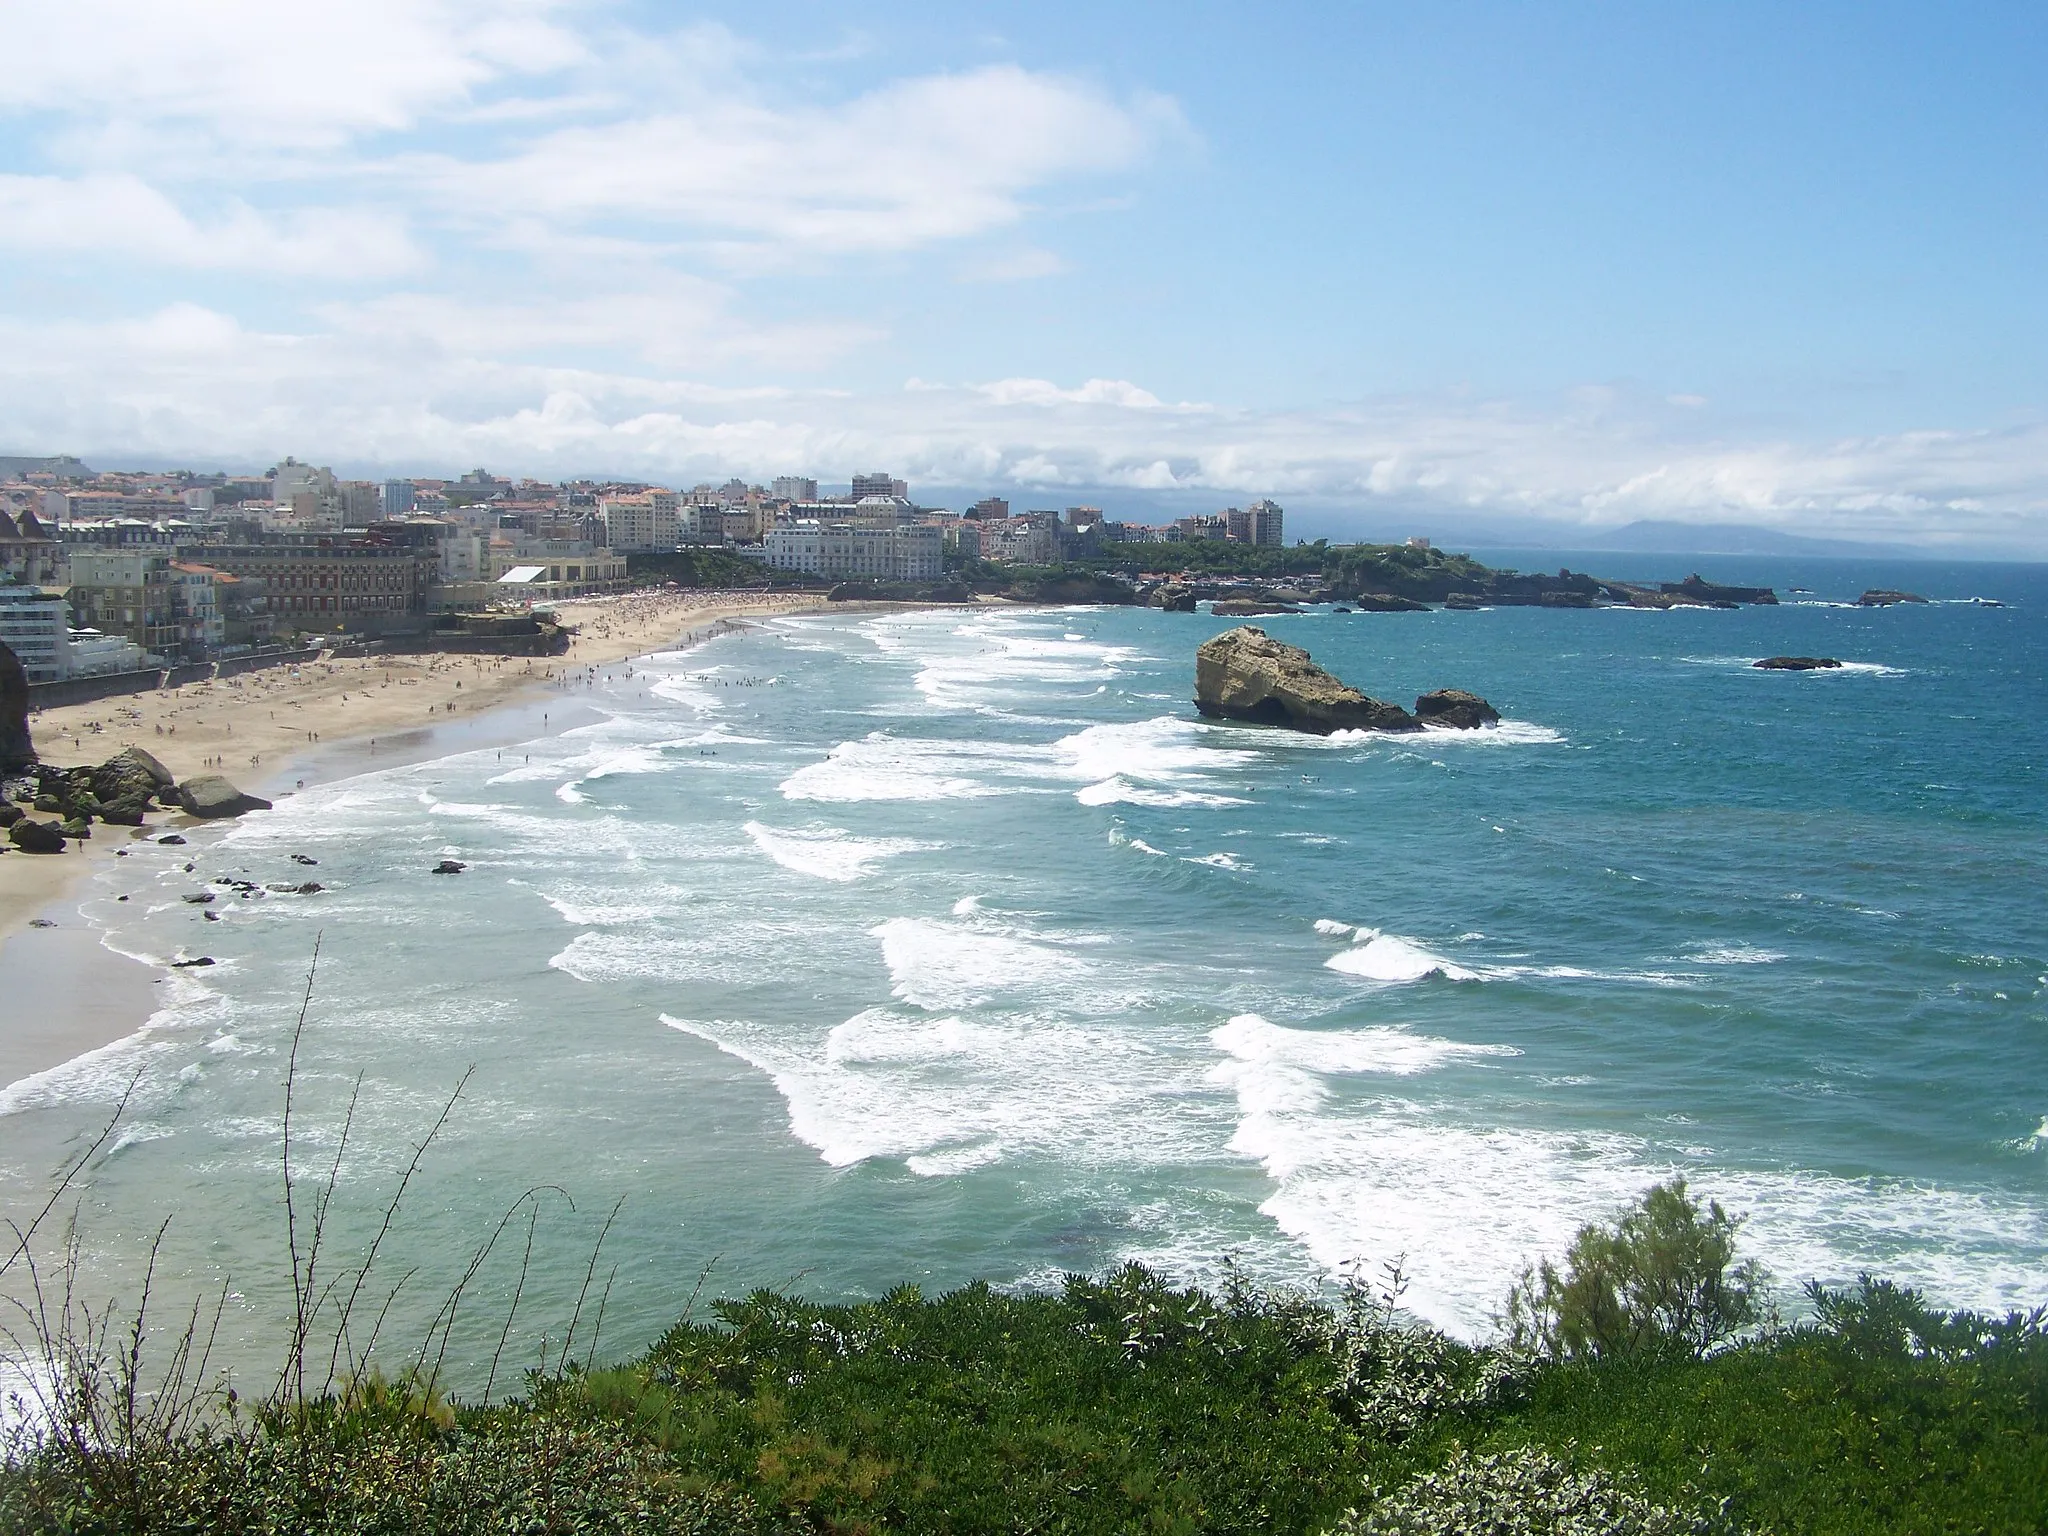 Photo showing: Landscape of city of Biarritz and the Atlantic Ocean, in Pyrénées-Atlantiques, France.